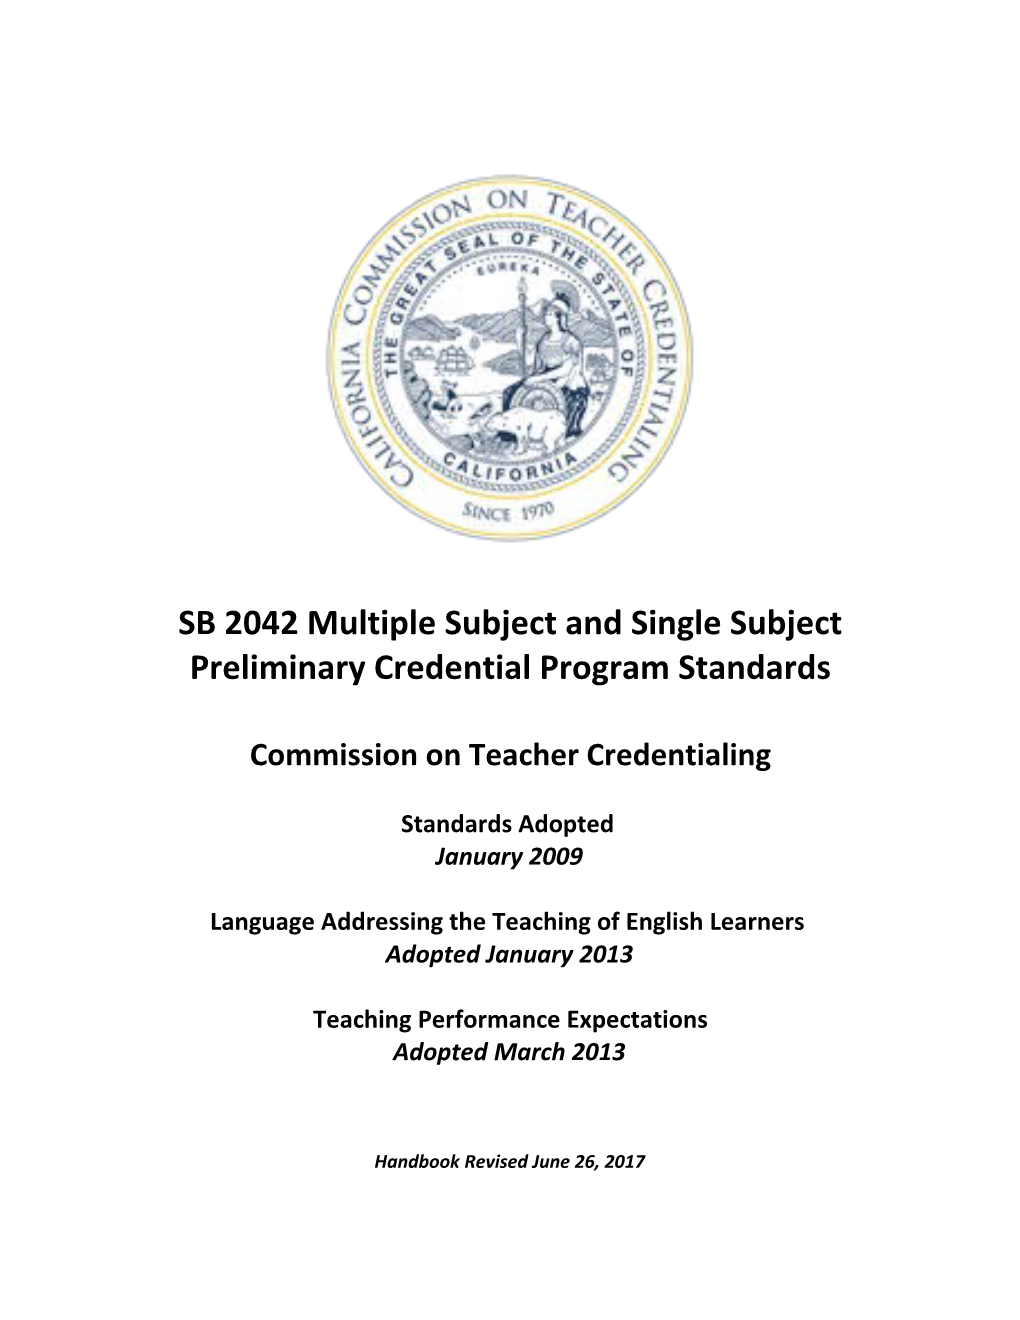 Proposed SB 2042 Multiple and Single Subject Preliminary Credential Program Standards